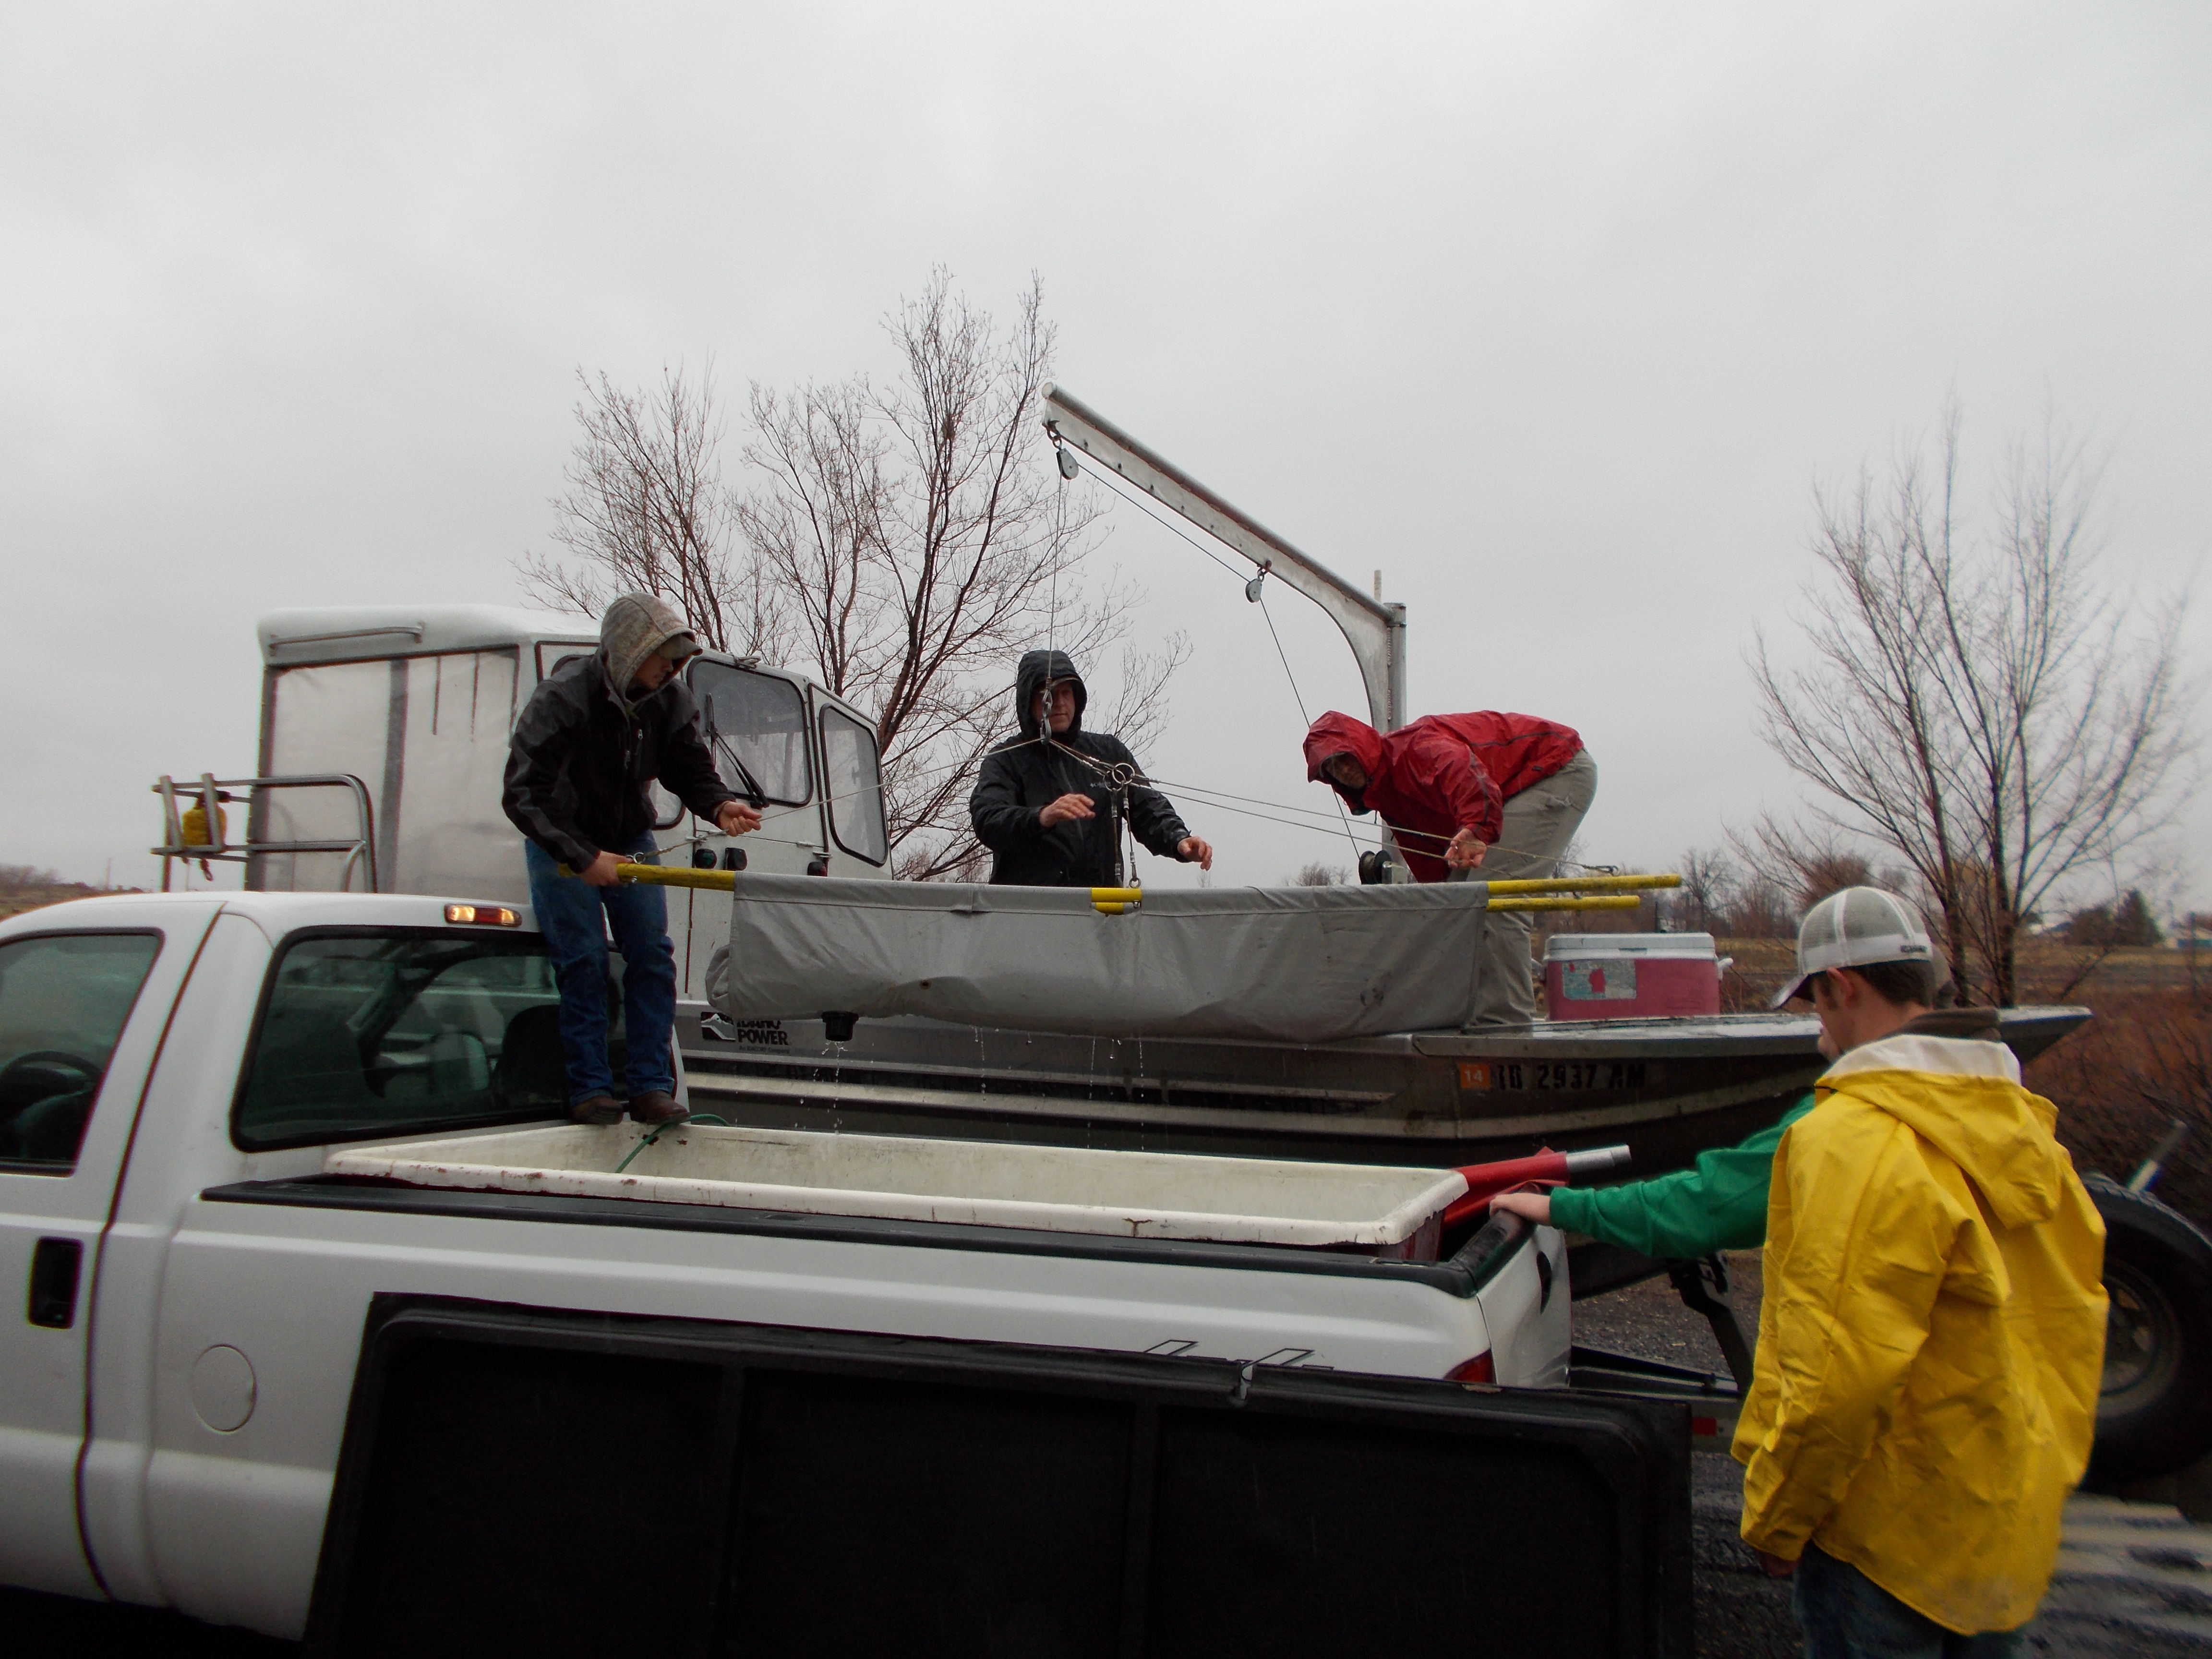 Sturgeon transfered from truck to boat